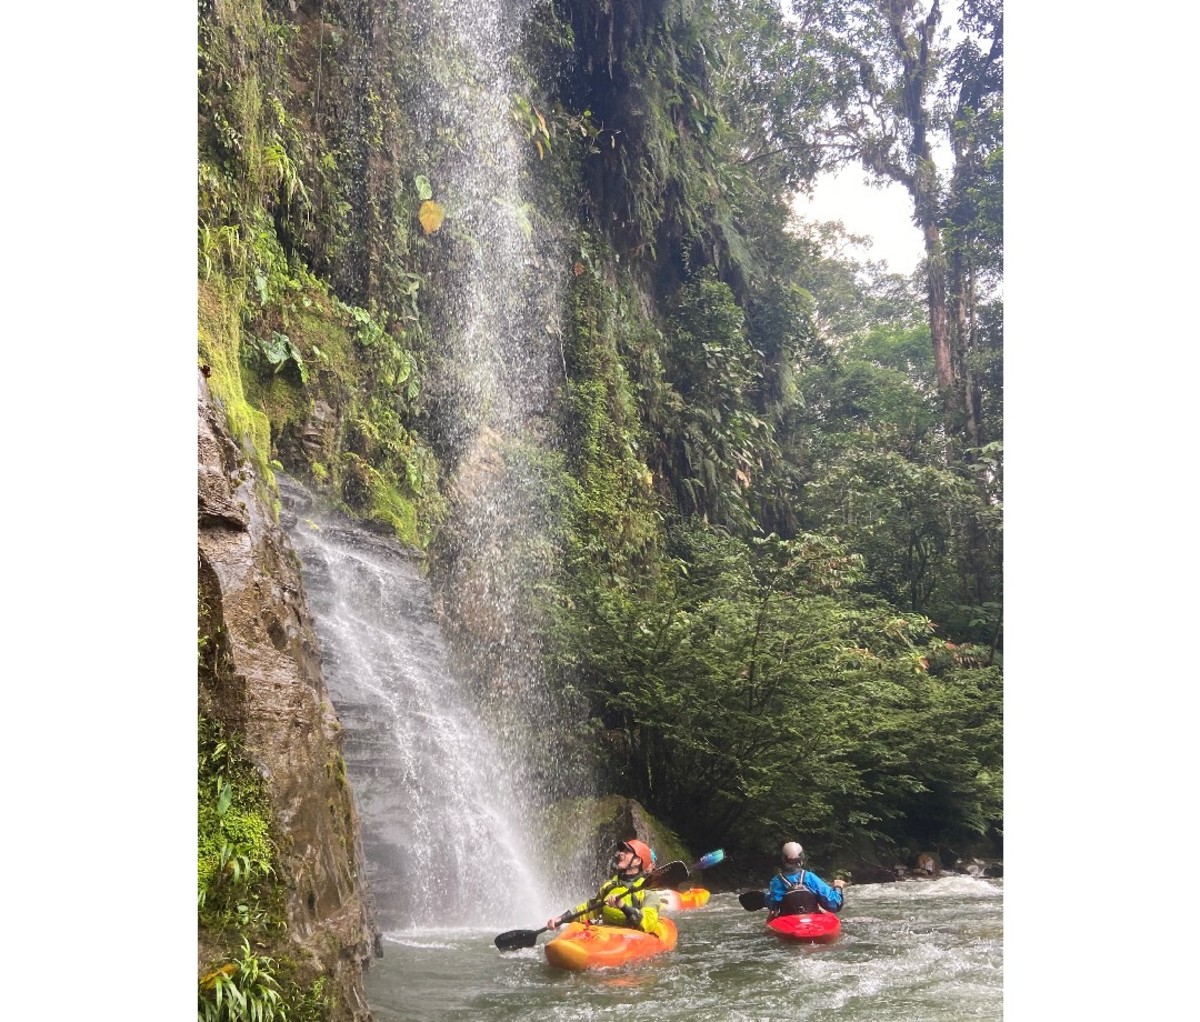 Two kayakers float on the river at the foot of a cliffside waterfall in Ecuador